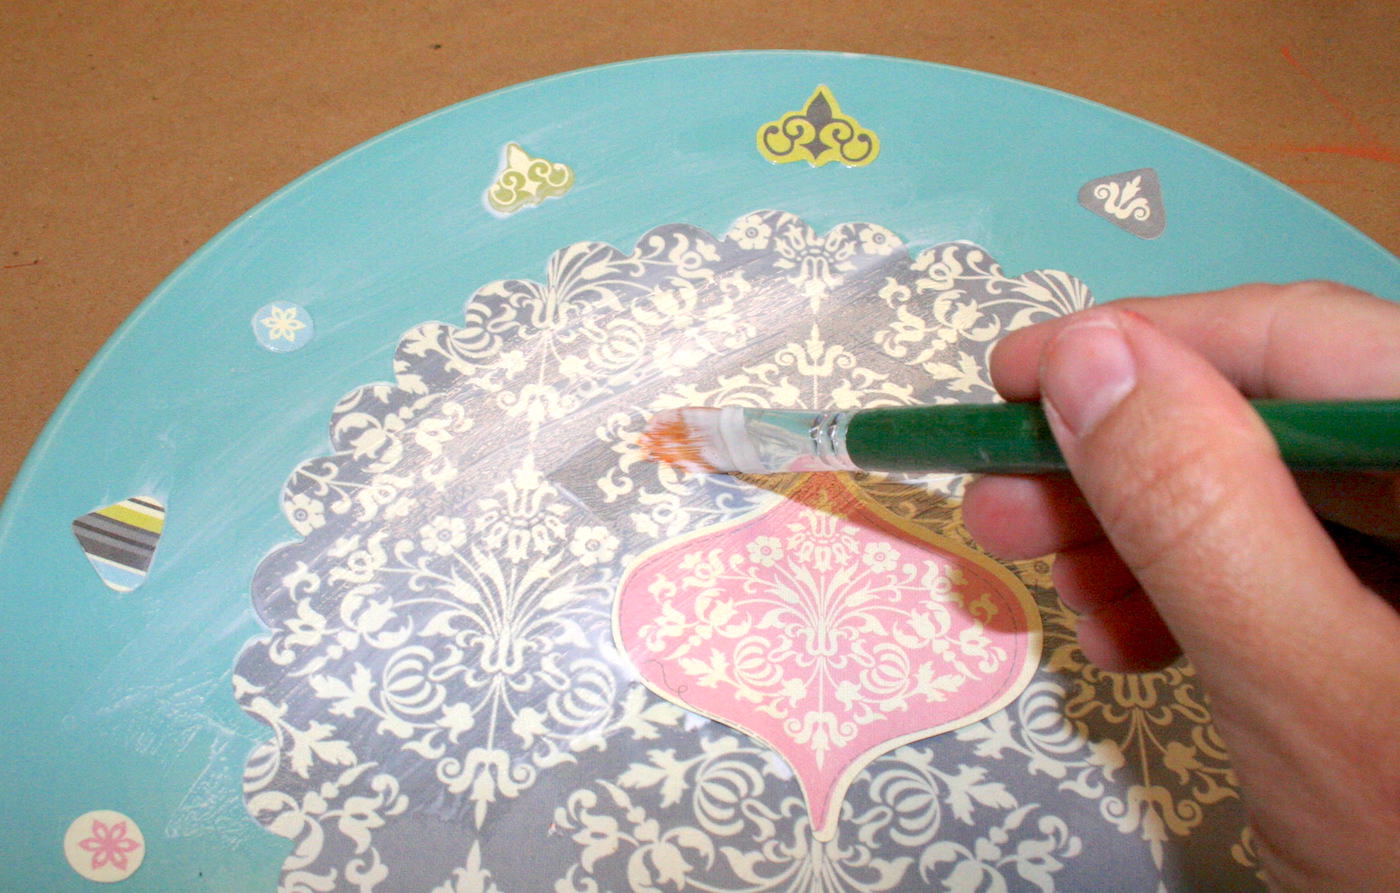 Painting Mod Podge over the top of the plate to seal